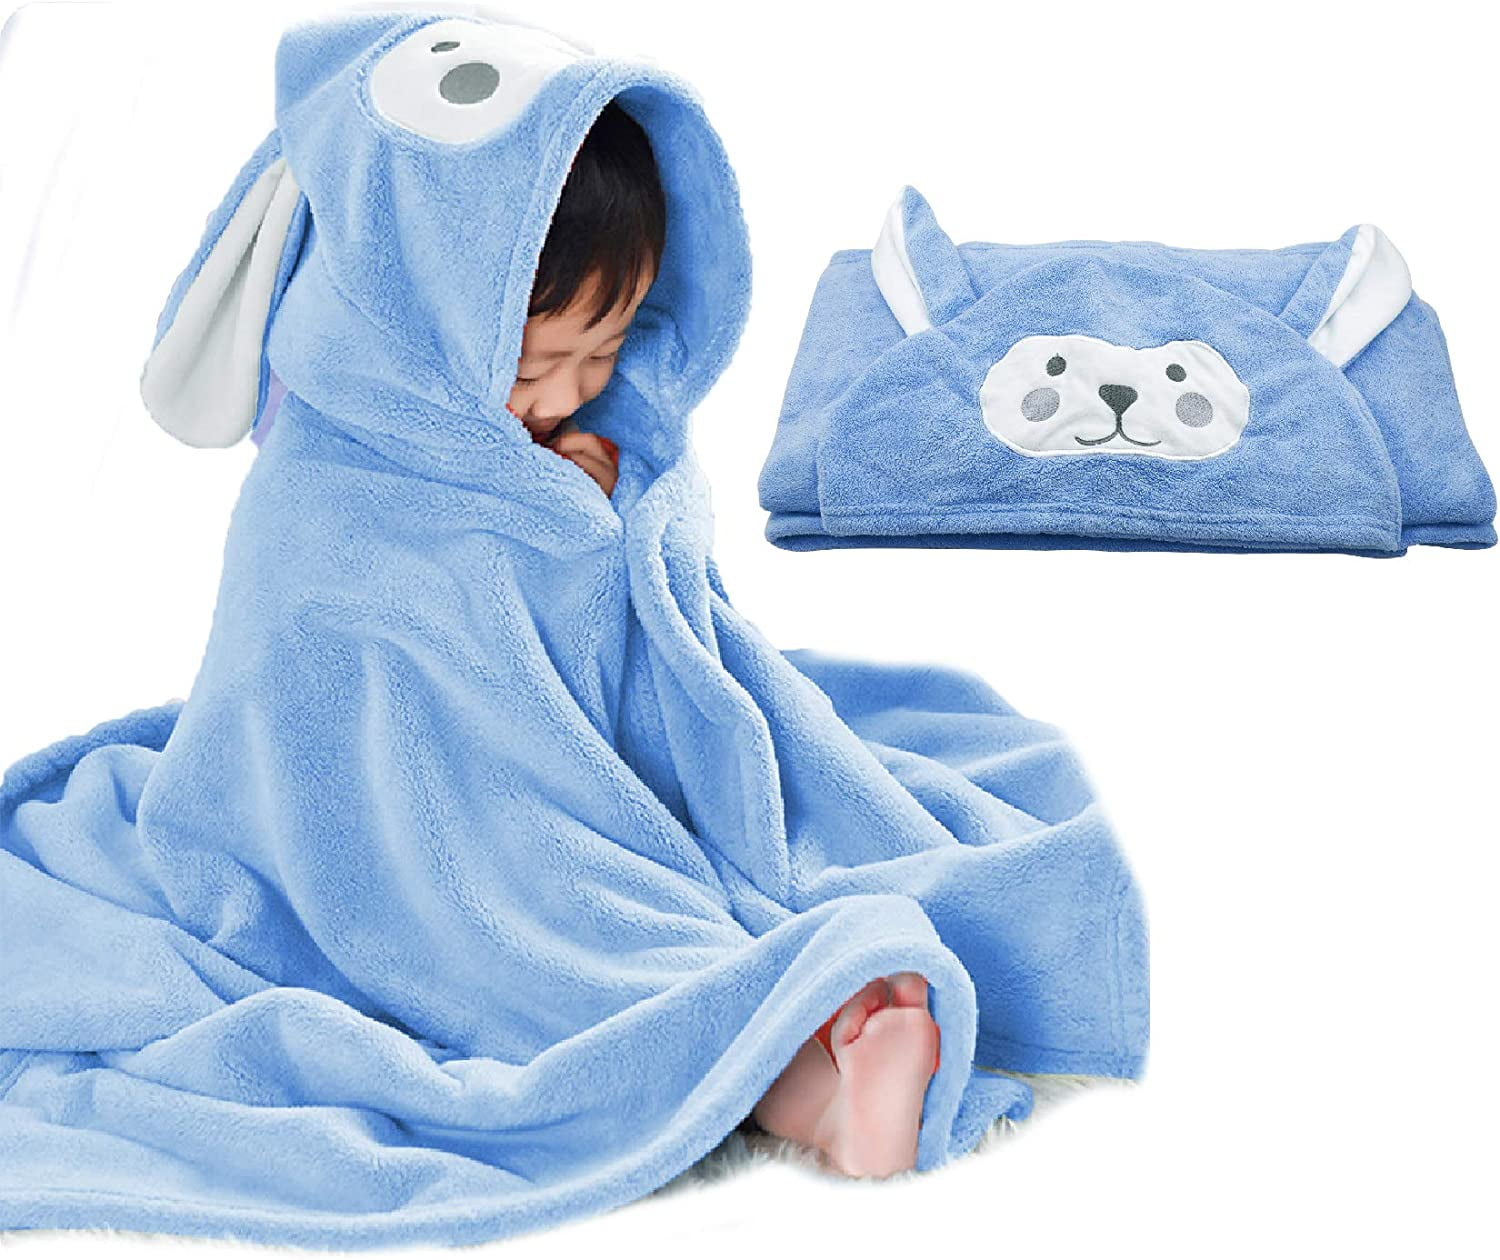 Highly Absorbent Bathrobe Blanket Gifts for Toddlers Shower Premium Hooded Towel for Kids,-28×55 INCH Large Size Kids Bath Towel,Ultra Soft Hooded Towel Wrap for Boys Girls 